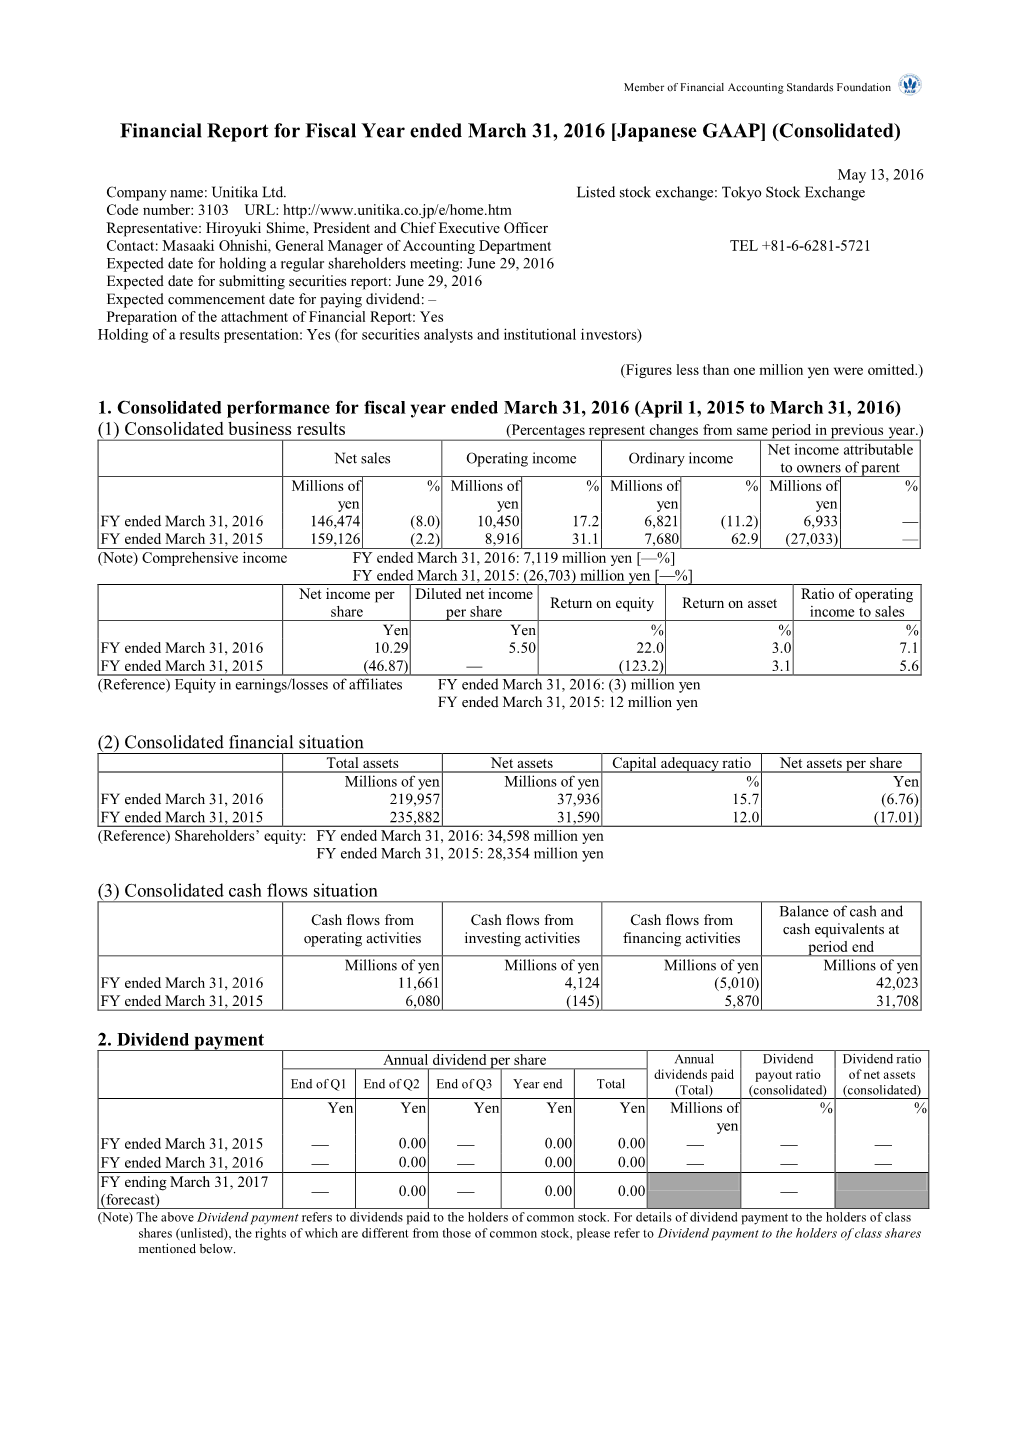 Financial Report for Fiscal Year Ended March 31, 2016 [Japanese GAAP] (Consolidated)